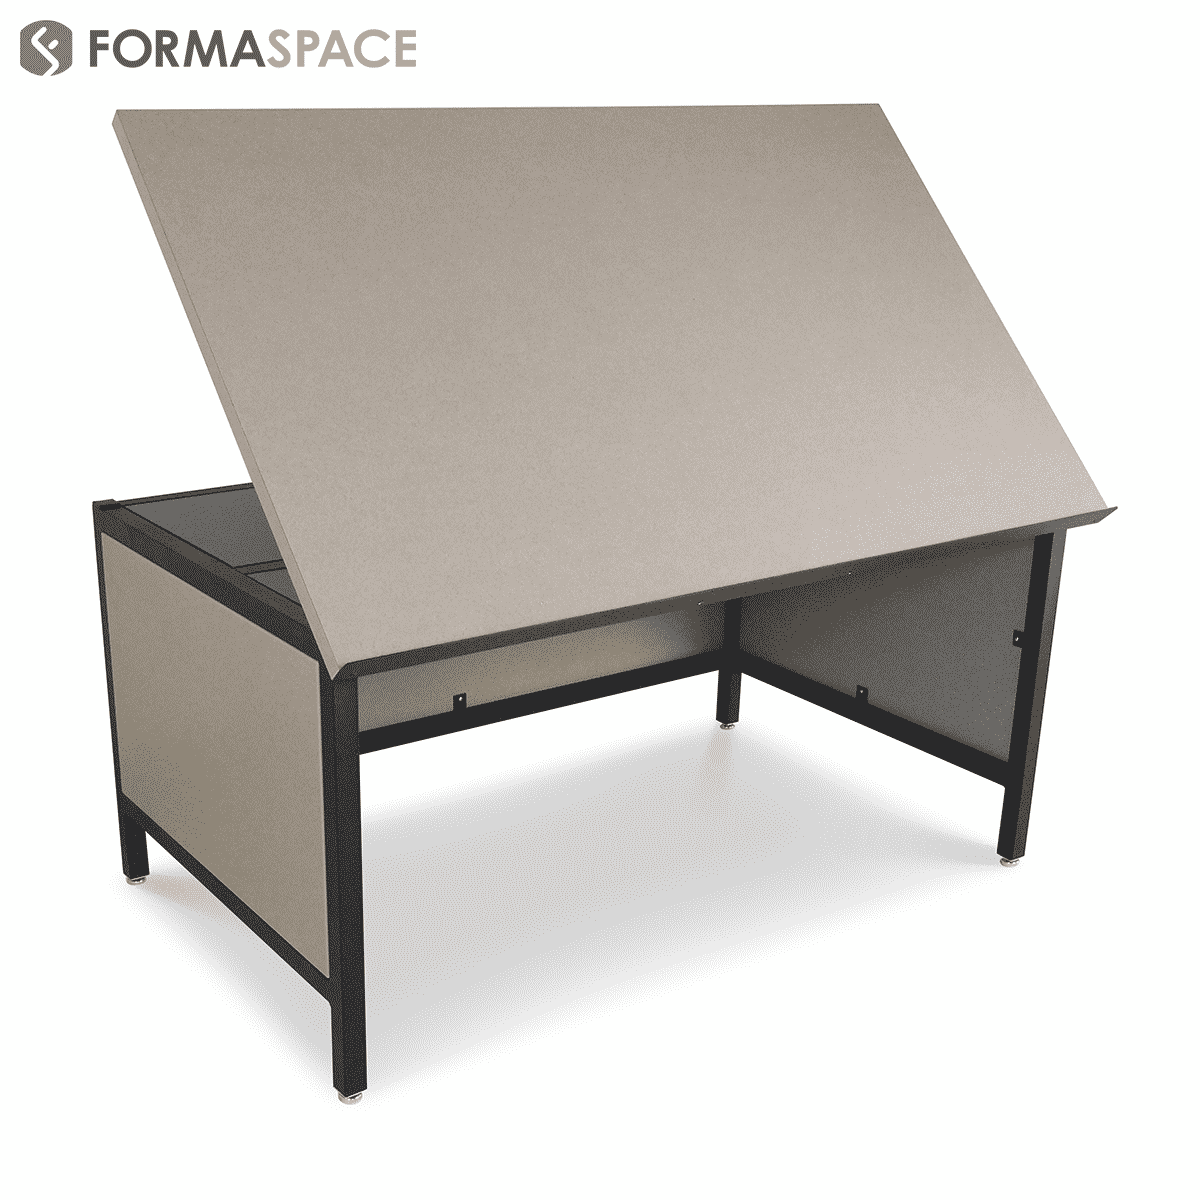 Drafting table with Modesty Panels | Formaspace